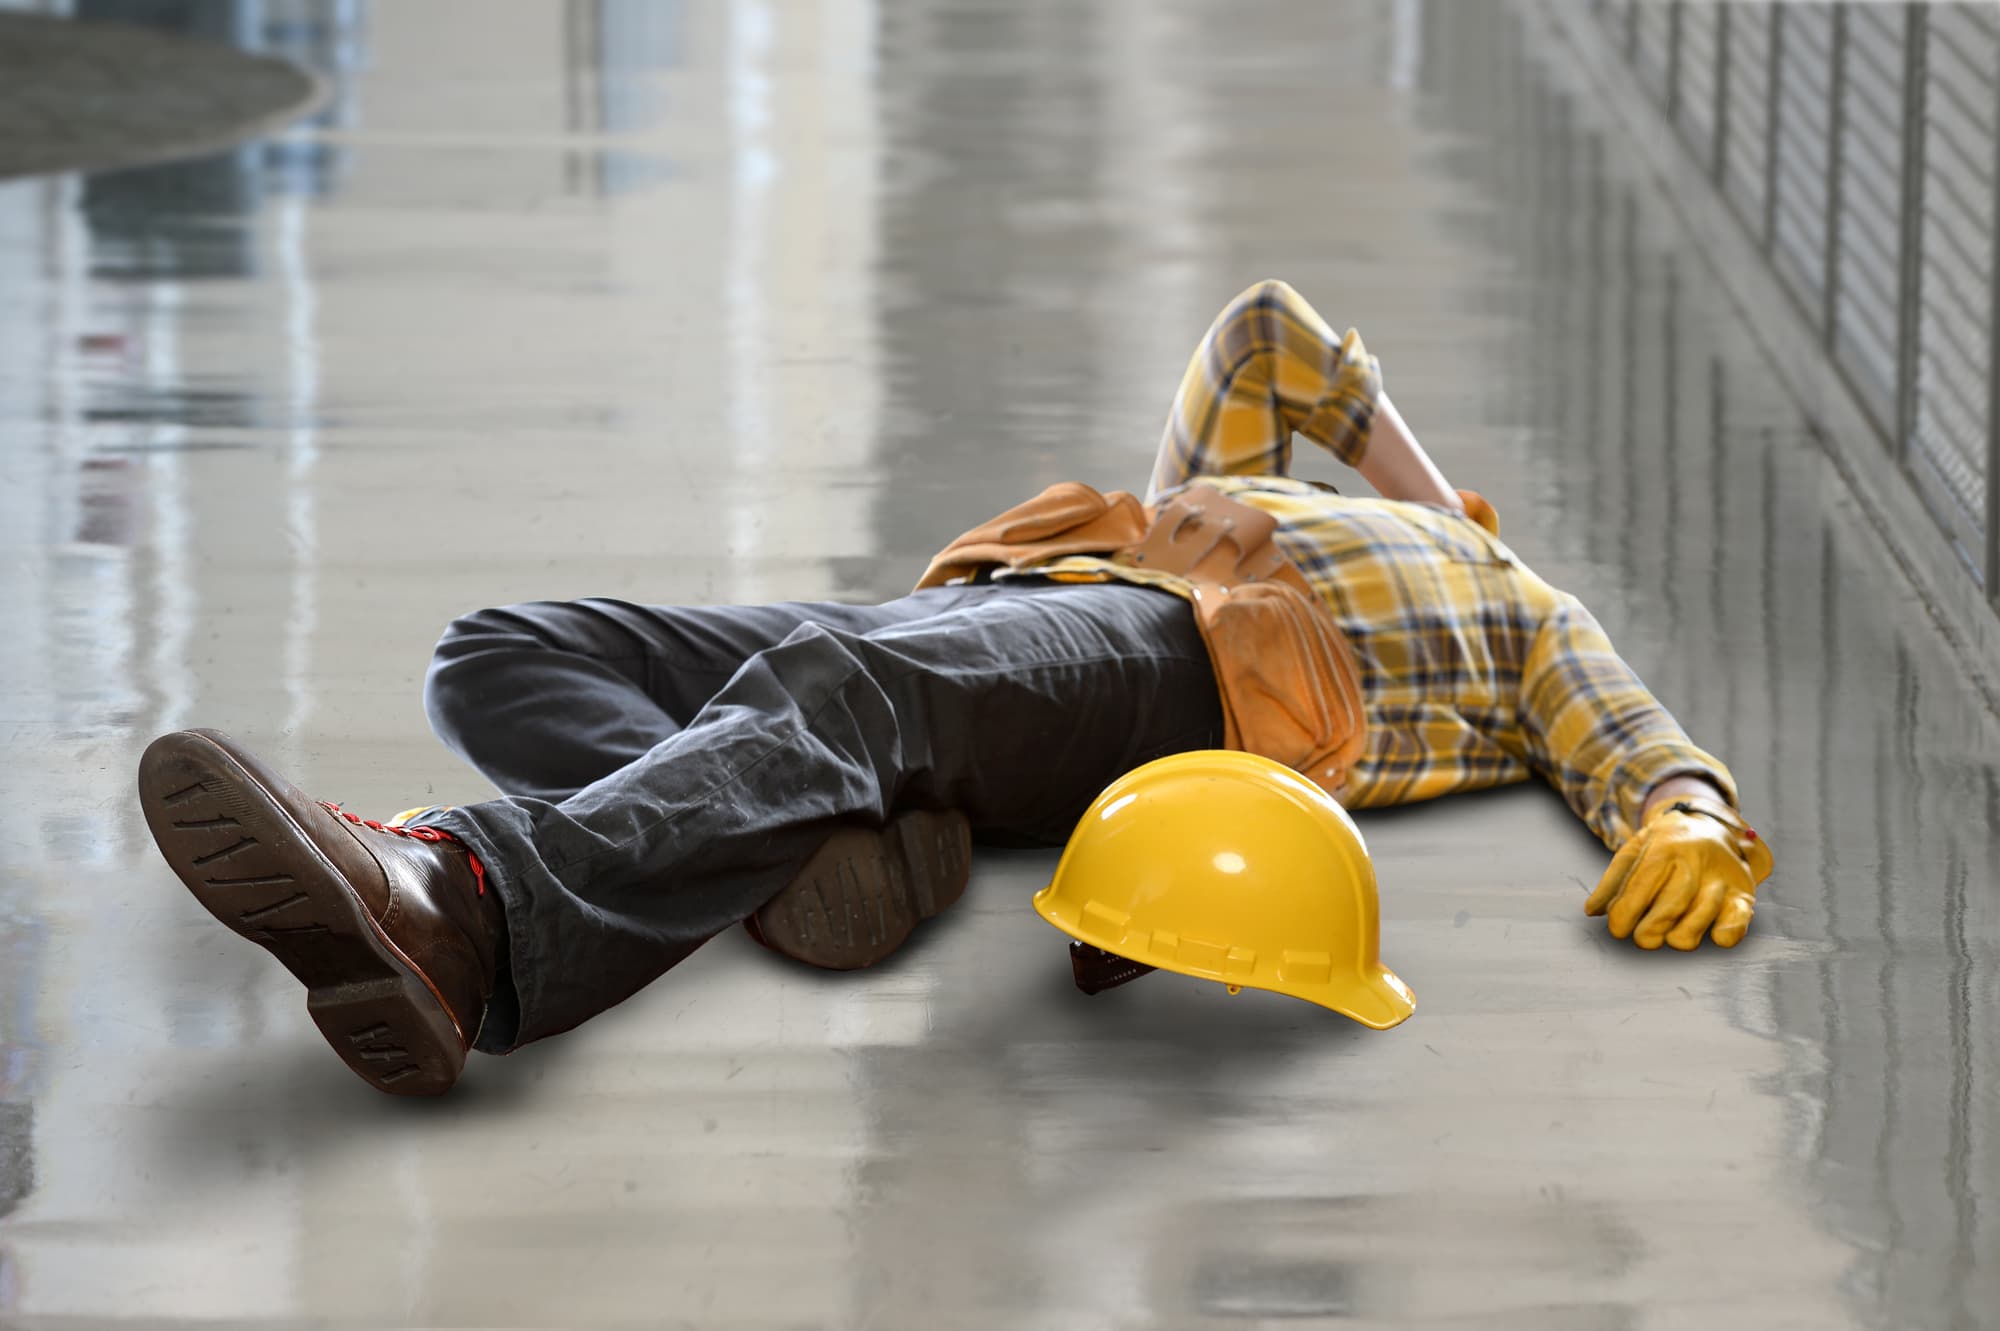 common workplace injuries